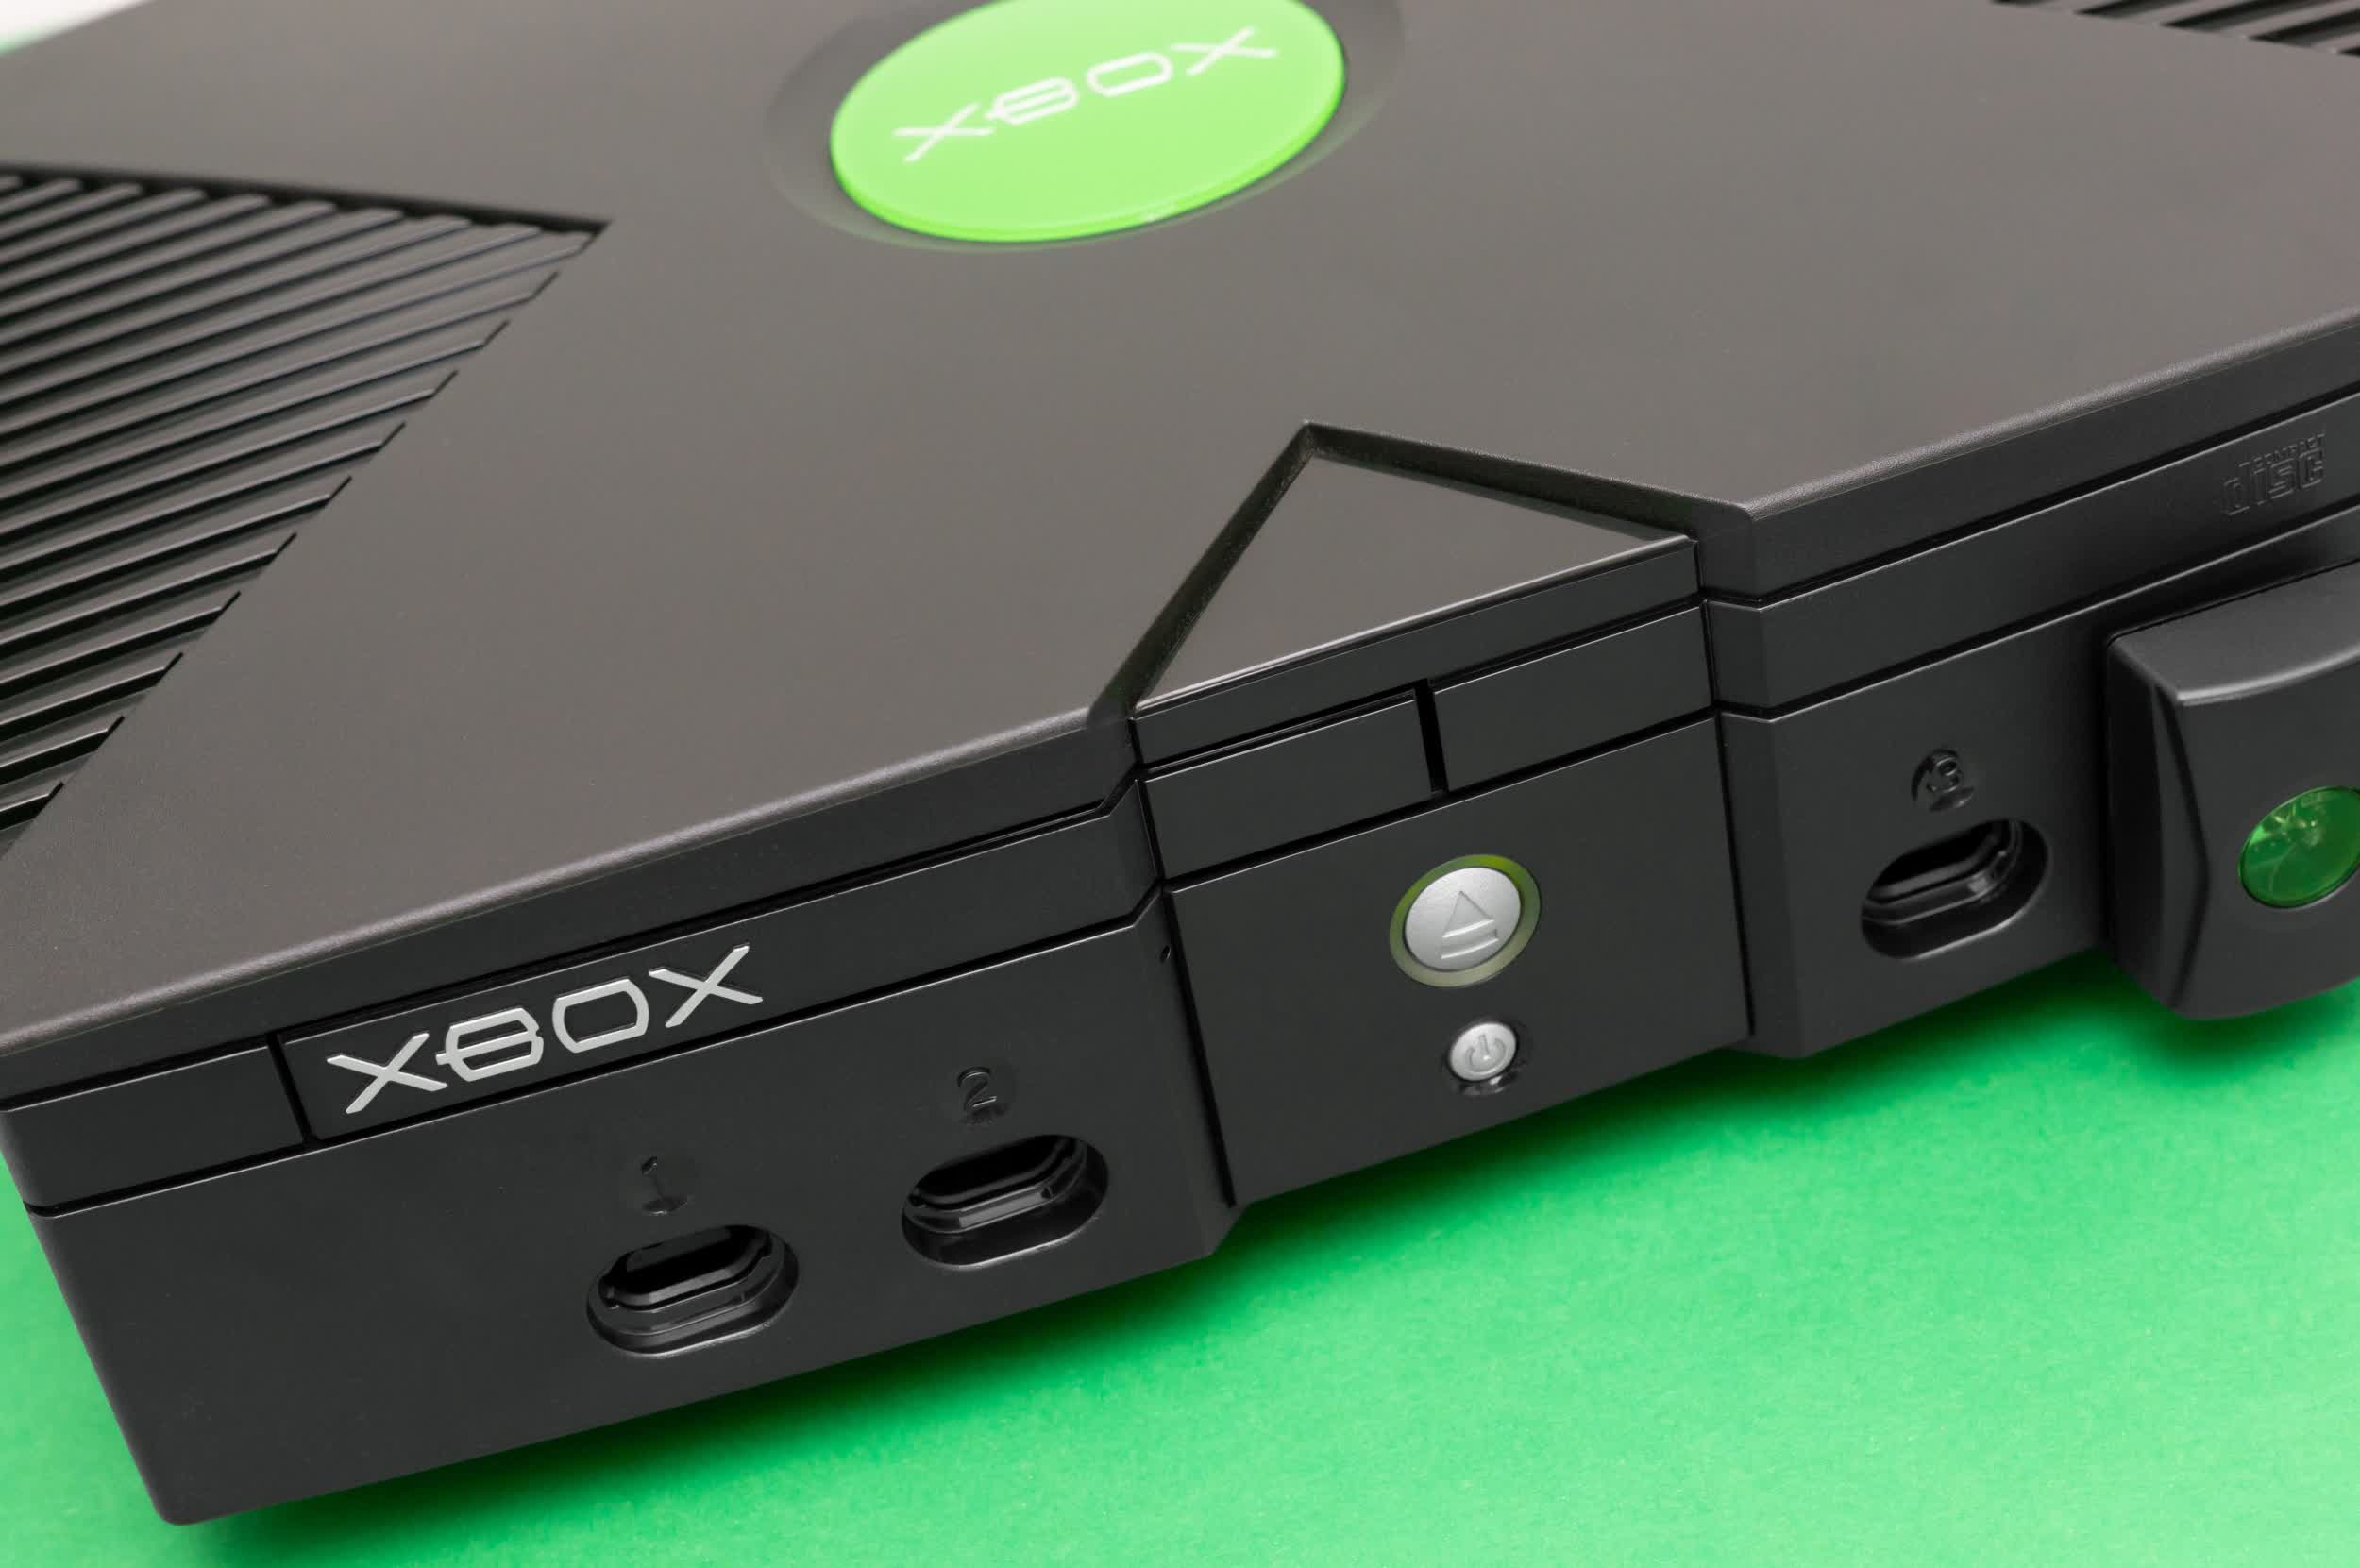 Newly disclosed Xbox Easter egg has remained hidden for nearly 20 years